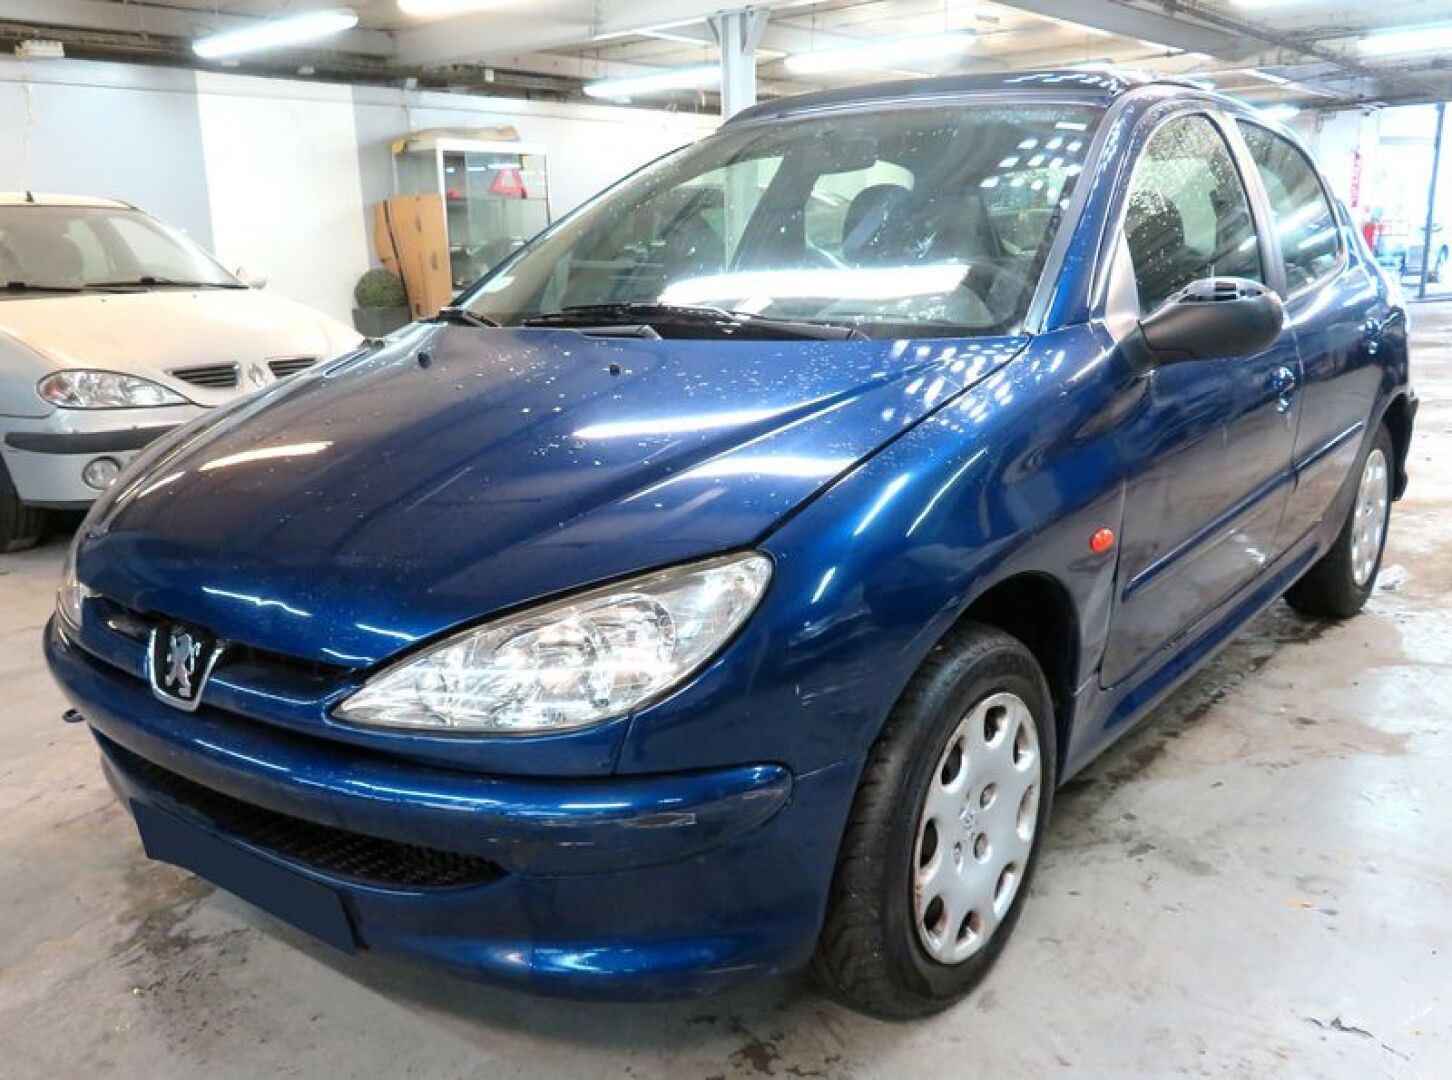 Null VOITURE
VP PEUGEOT 206 1.6i INJECTION
Carrosserie : CI
N° série type : VF32&hellip;